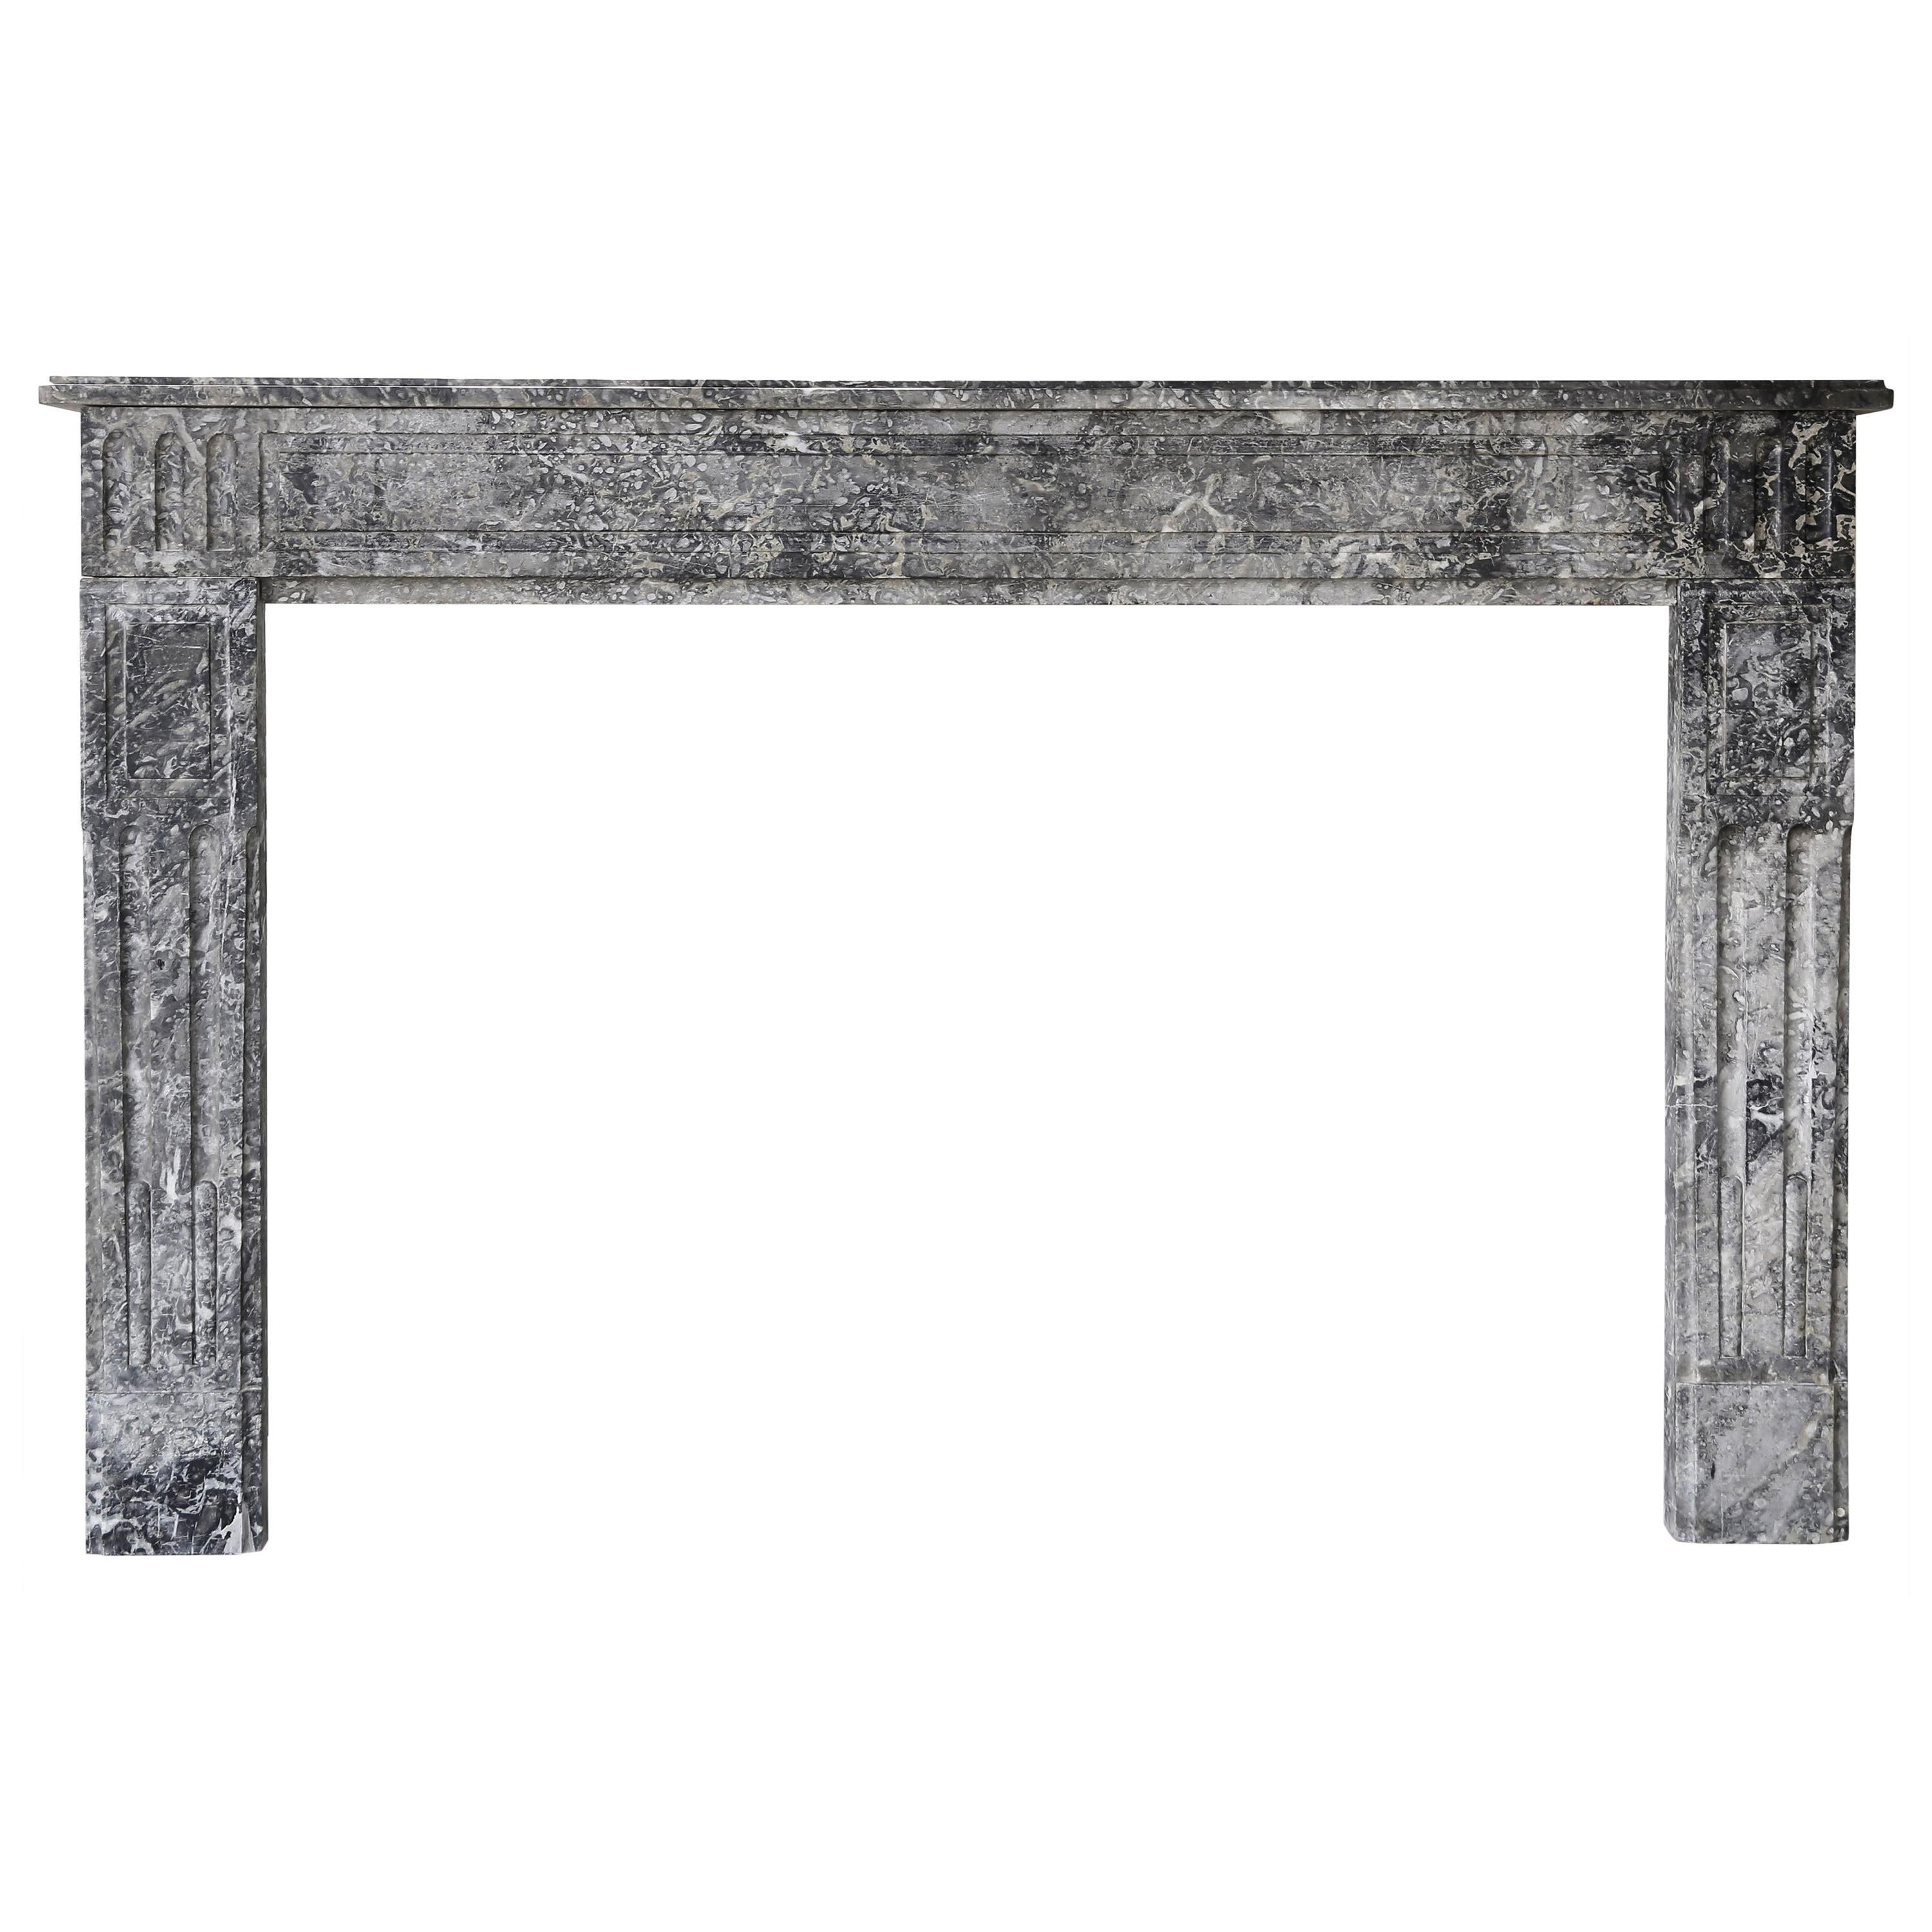 Antique Marble Fireplace from the 19th Century, Style of Louis XVI